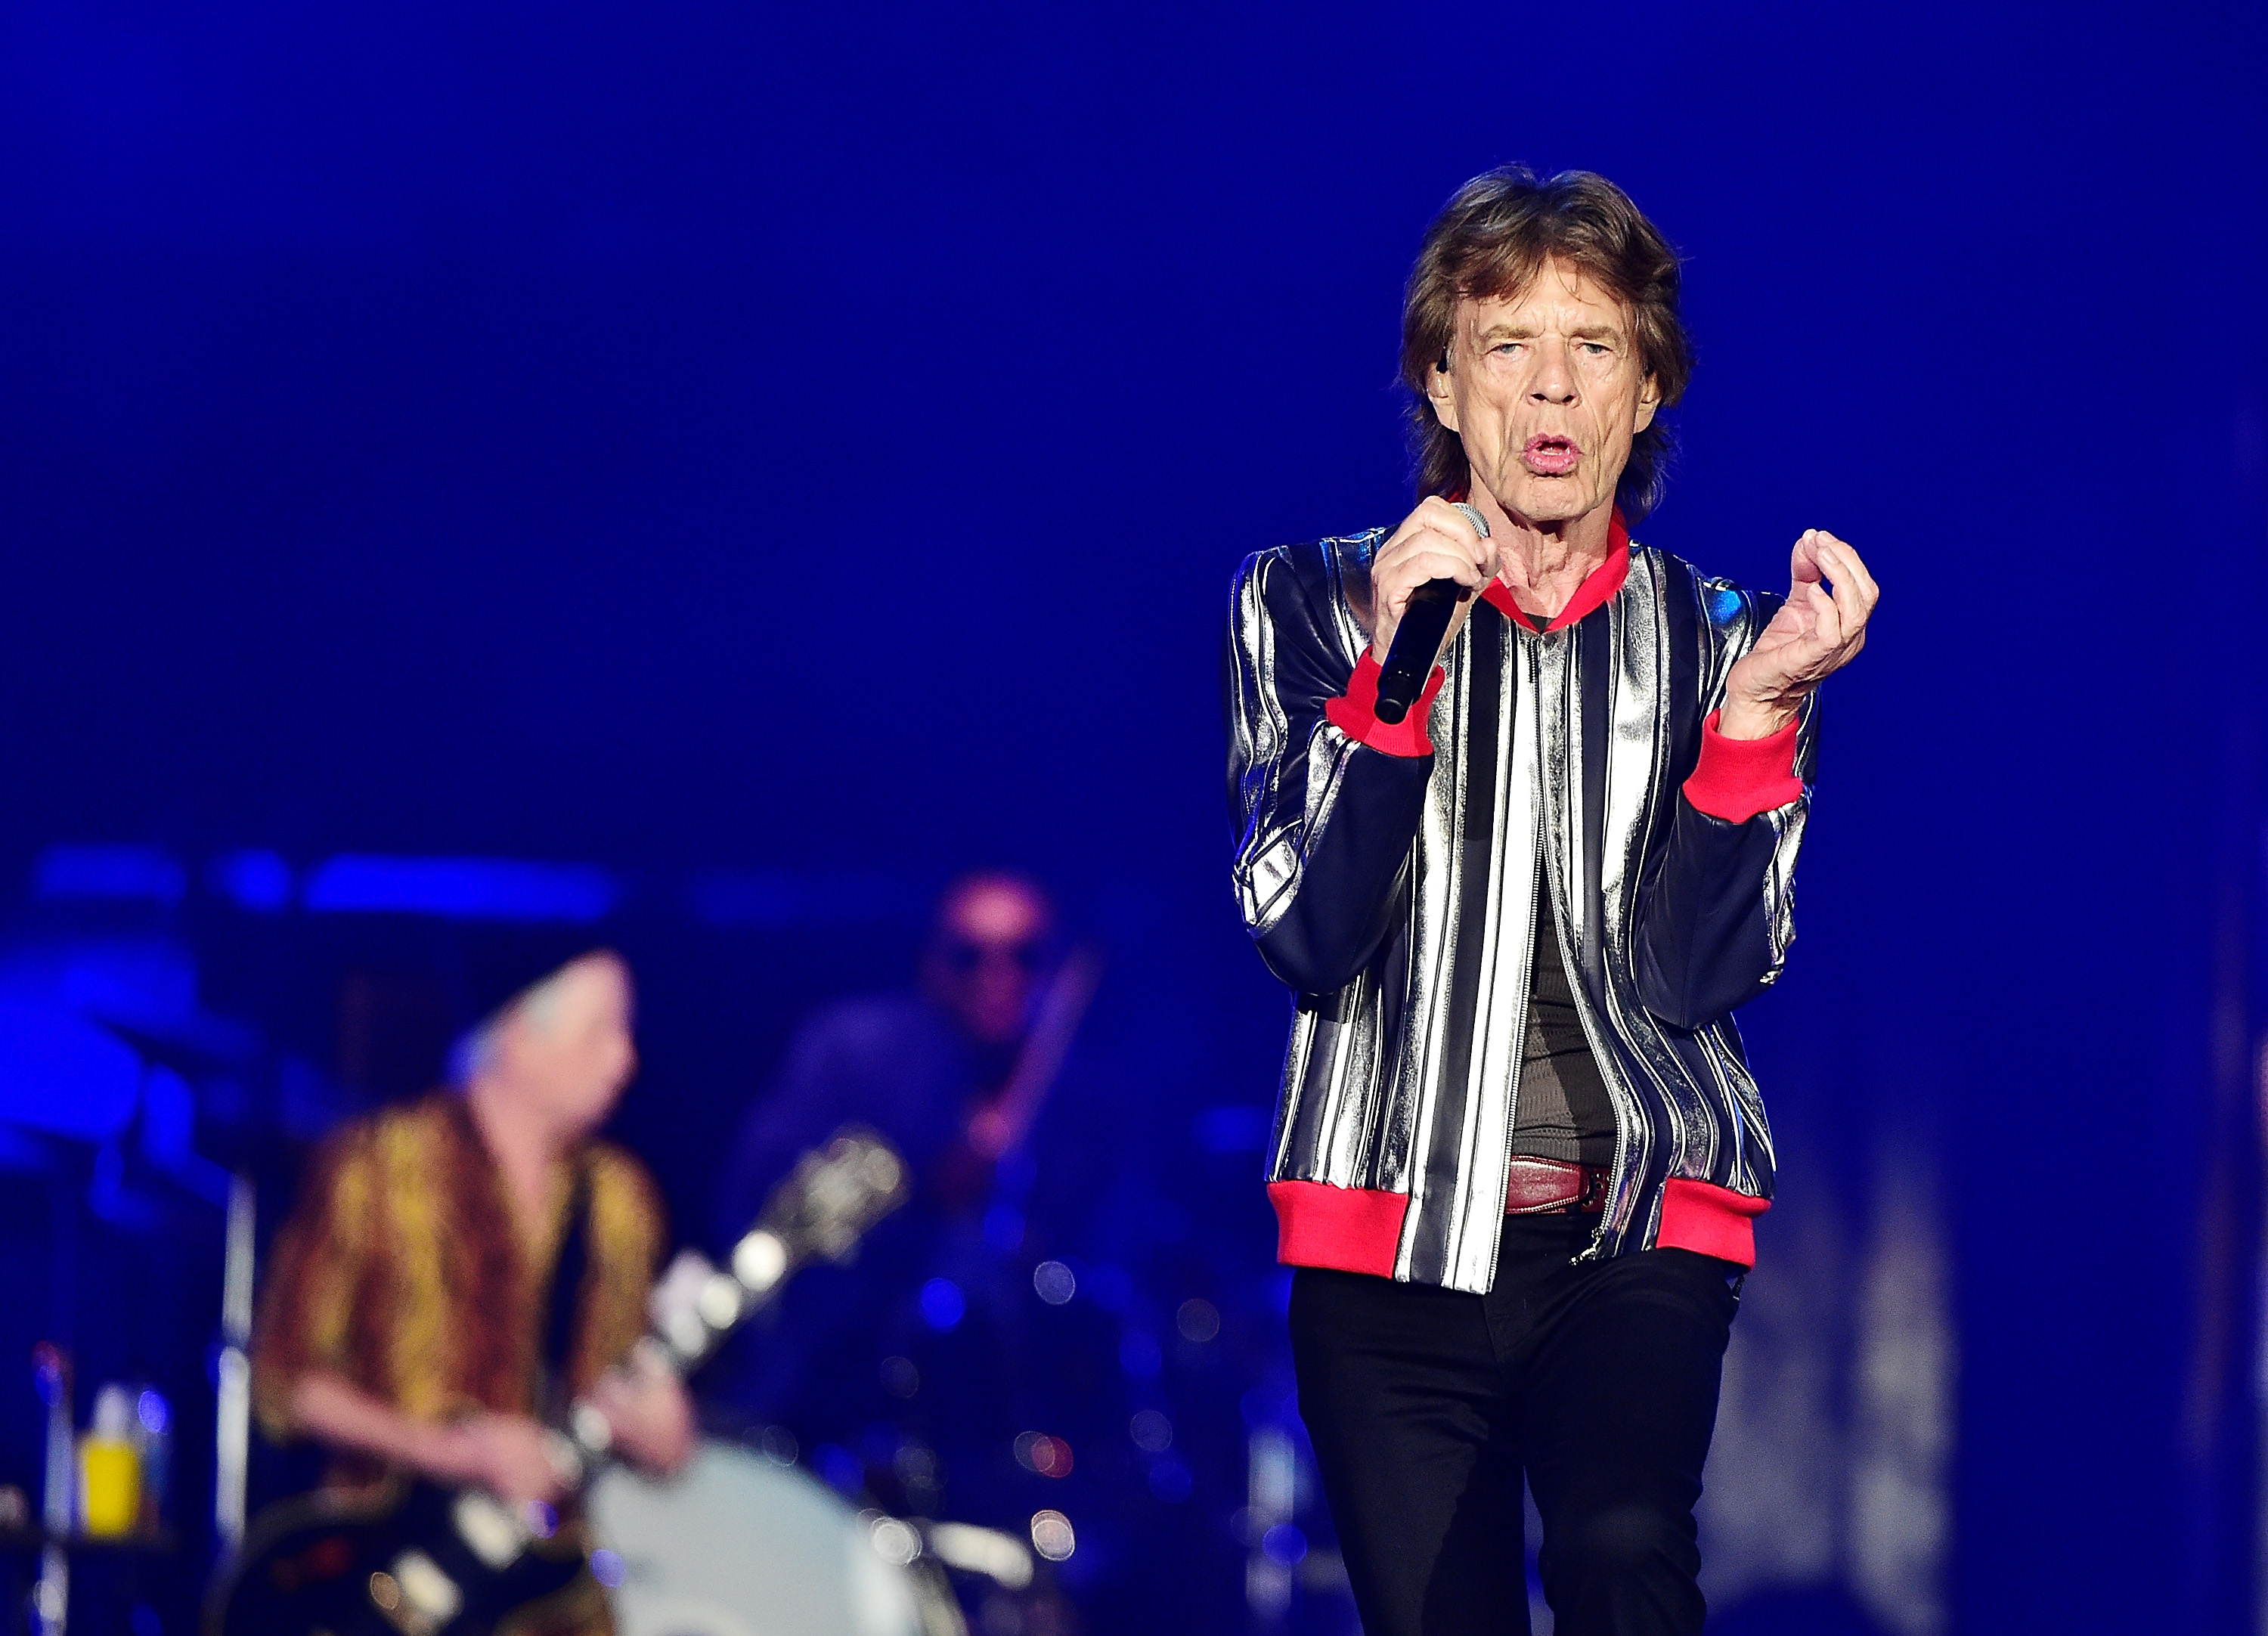 The Rolling Stones: 2021 “No Filter” Tour Opener - St. Louis